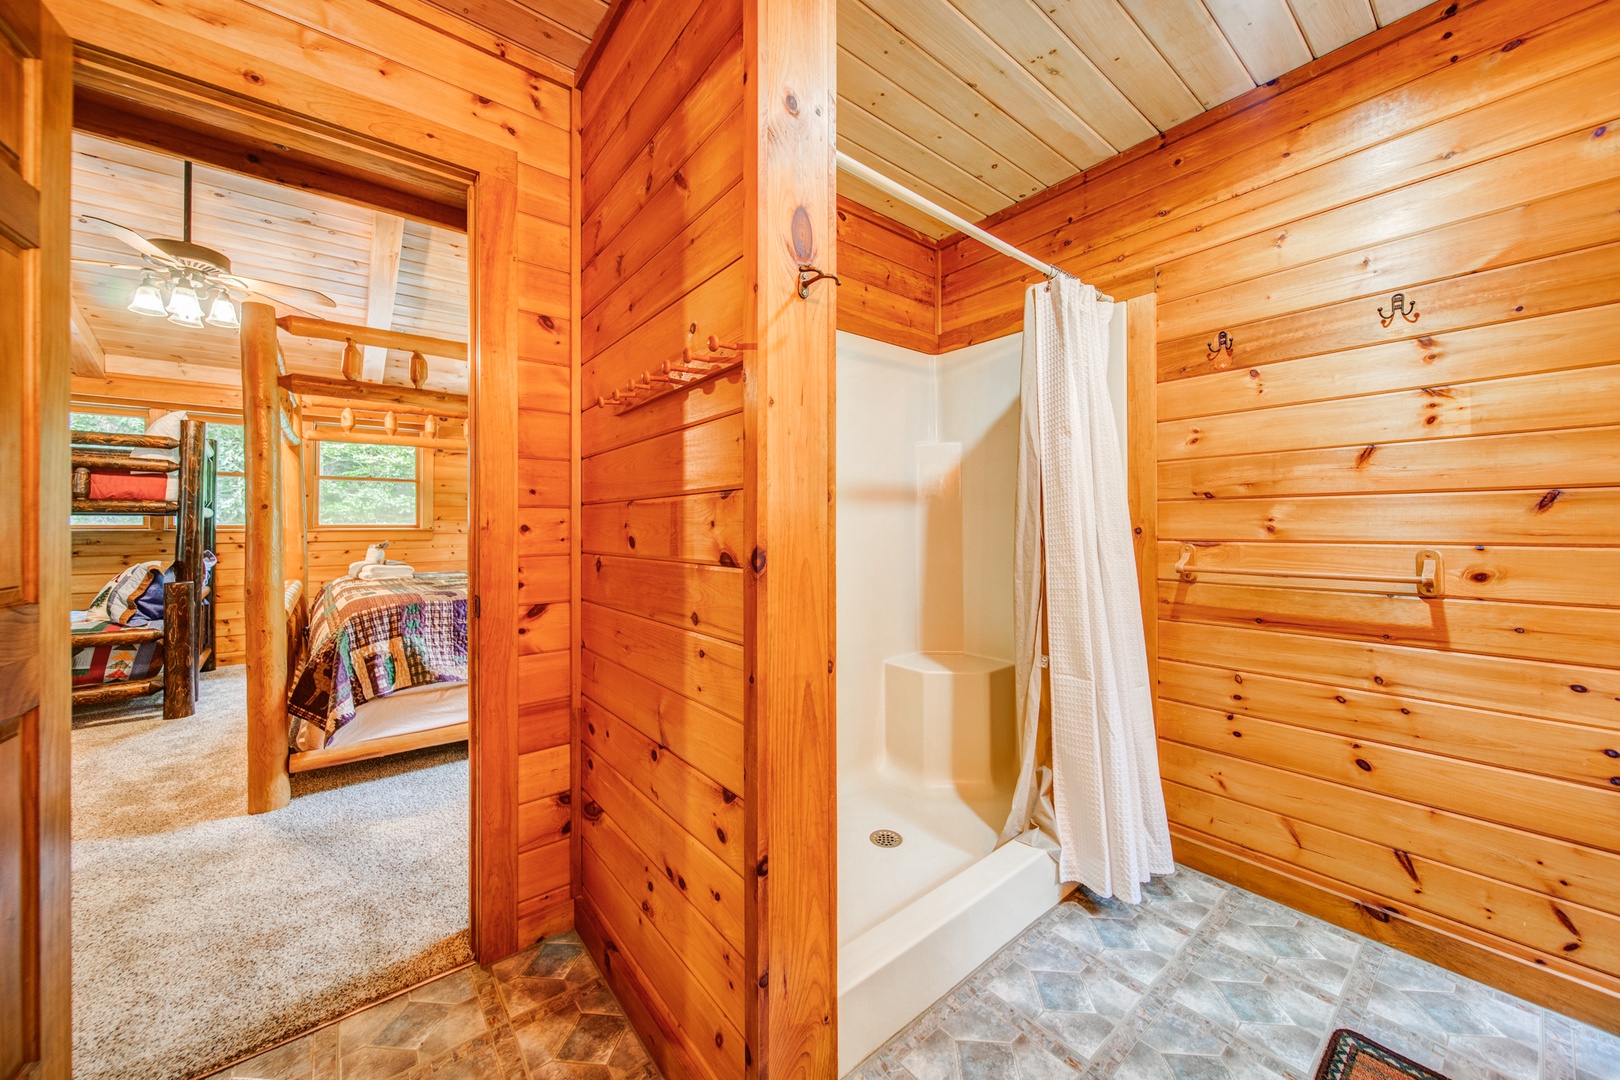 The loft-level bathroom offers a double vanity & walk-in shower